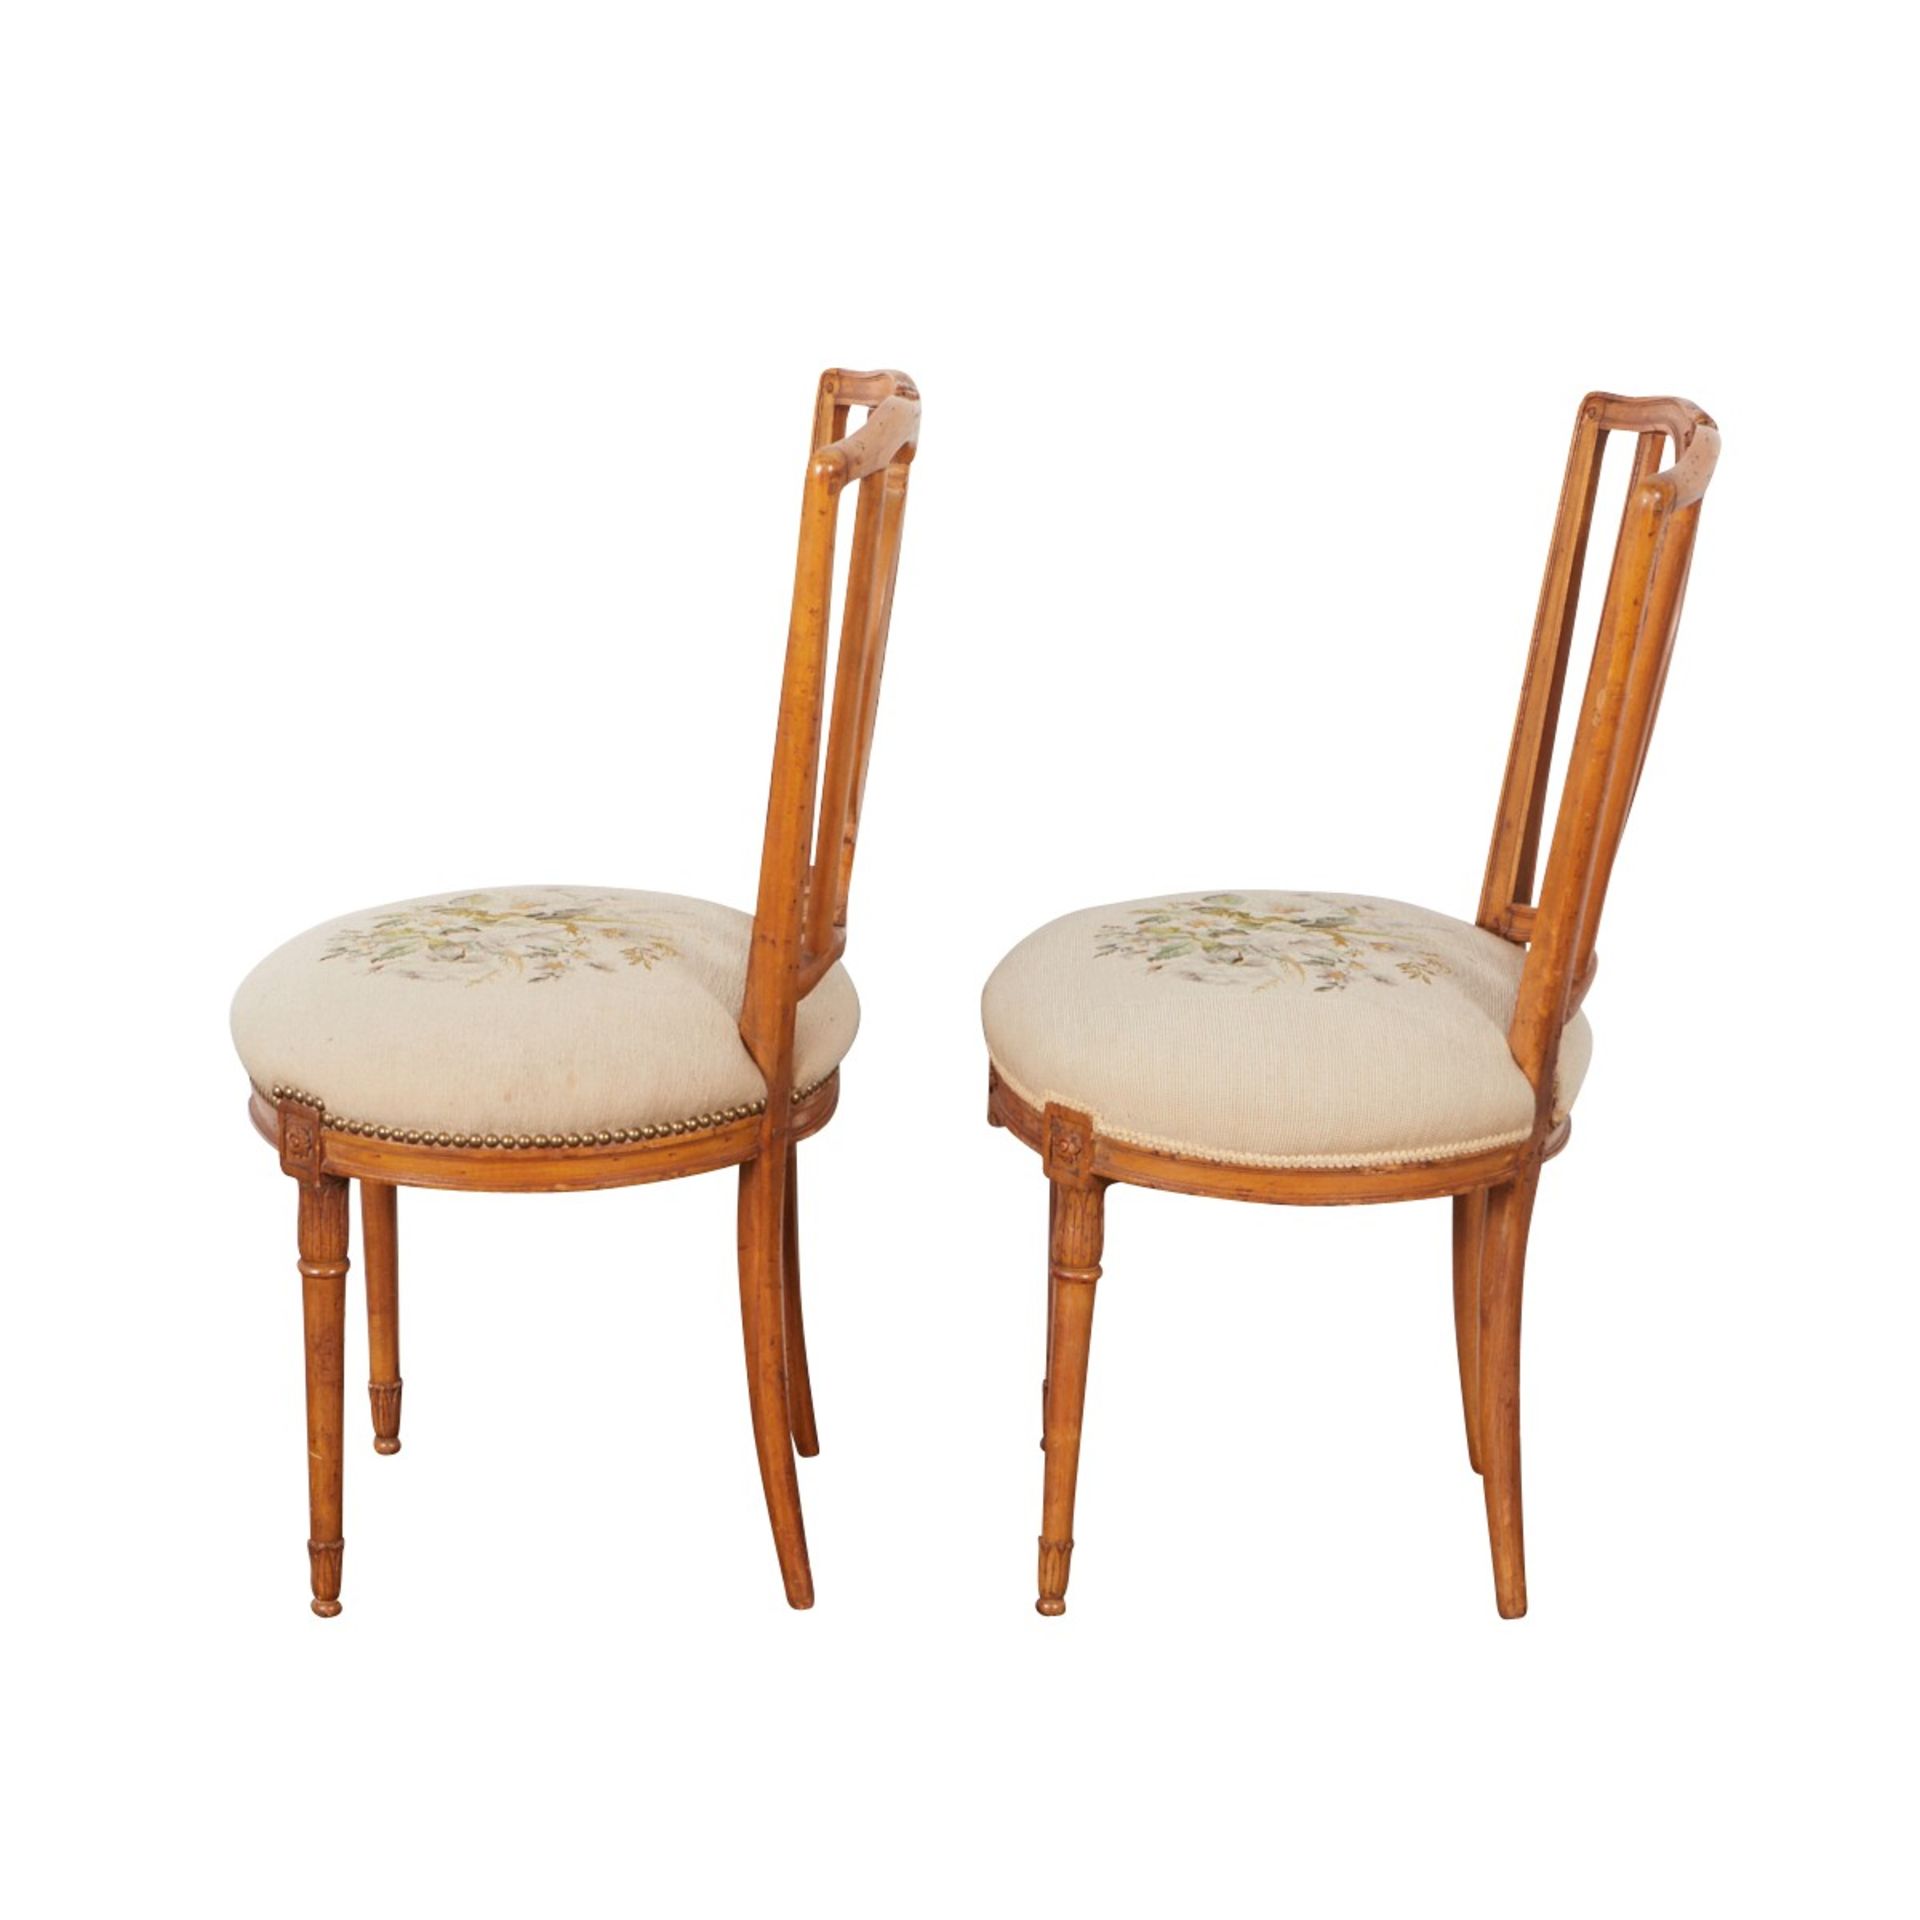 Pr French Side Chairs w/ Floral Decoration - Image 3 of 10